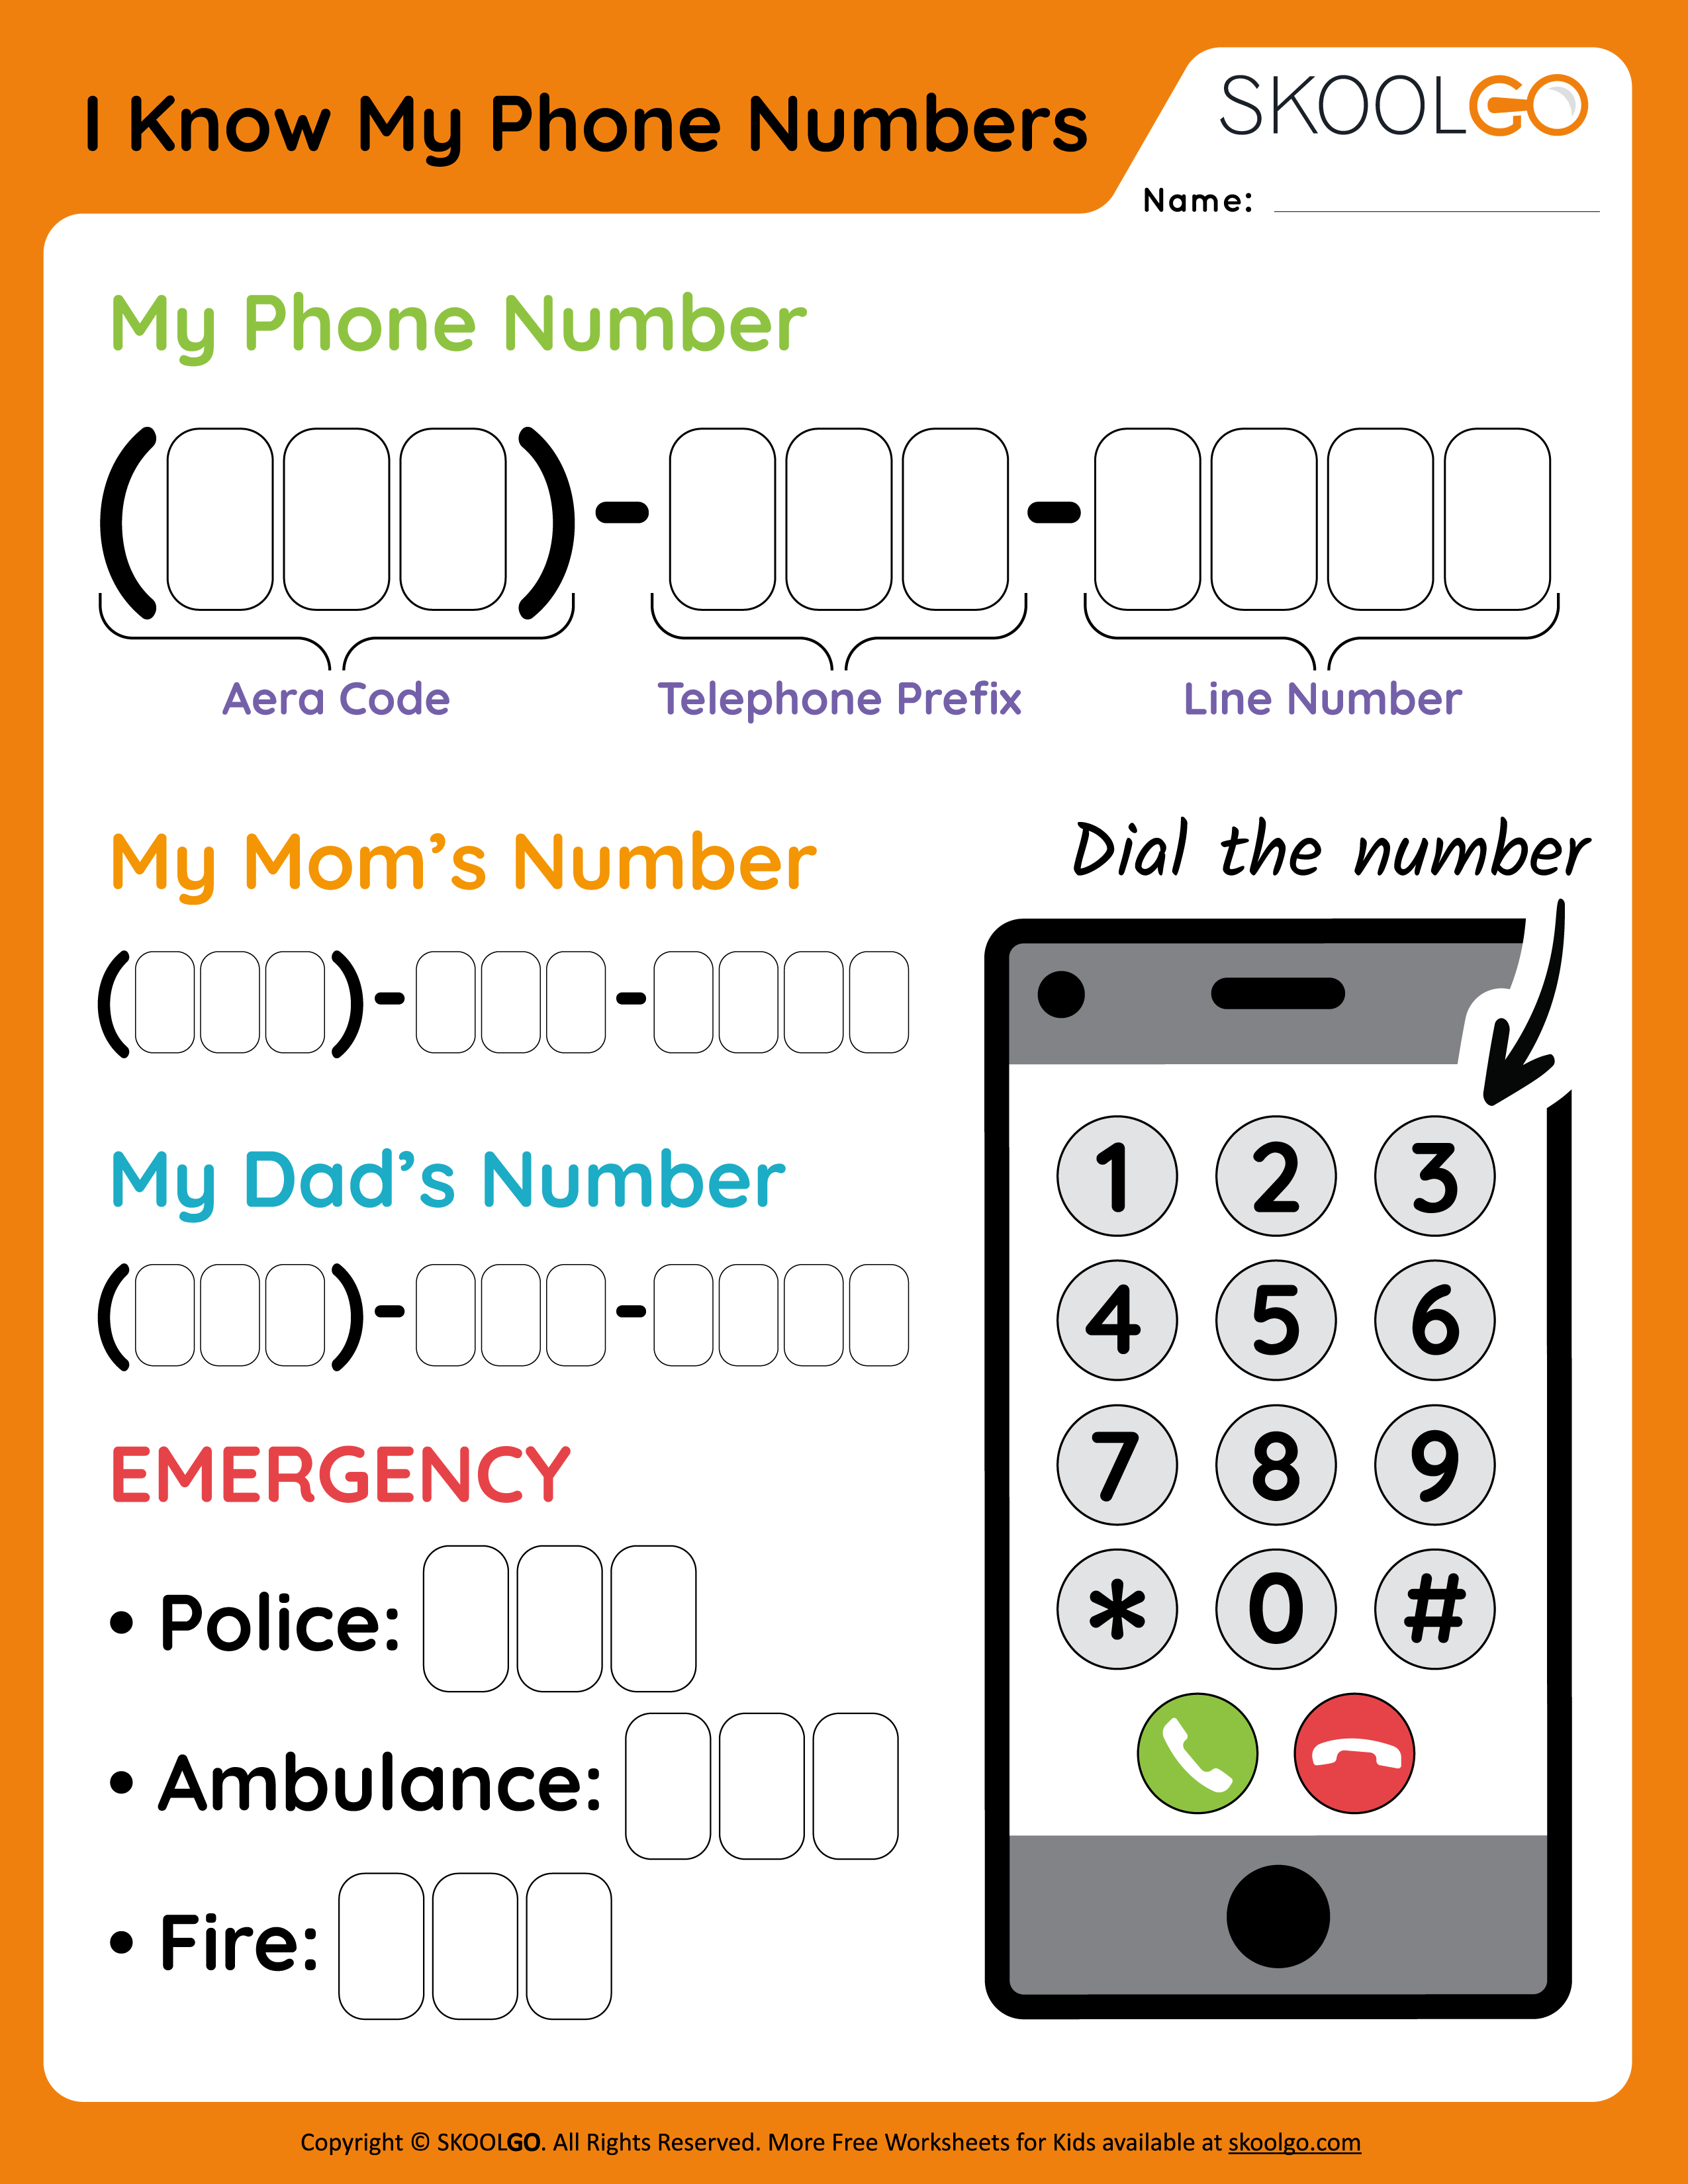 I Know My Phone Numbers - Free Worksheet for Kids